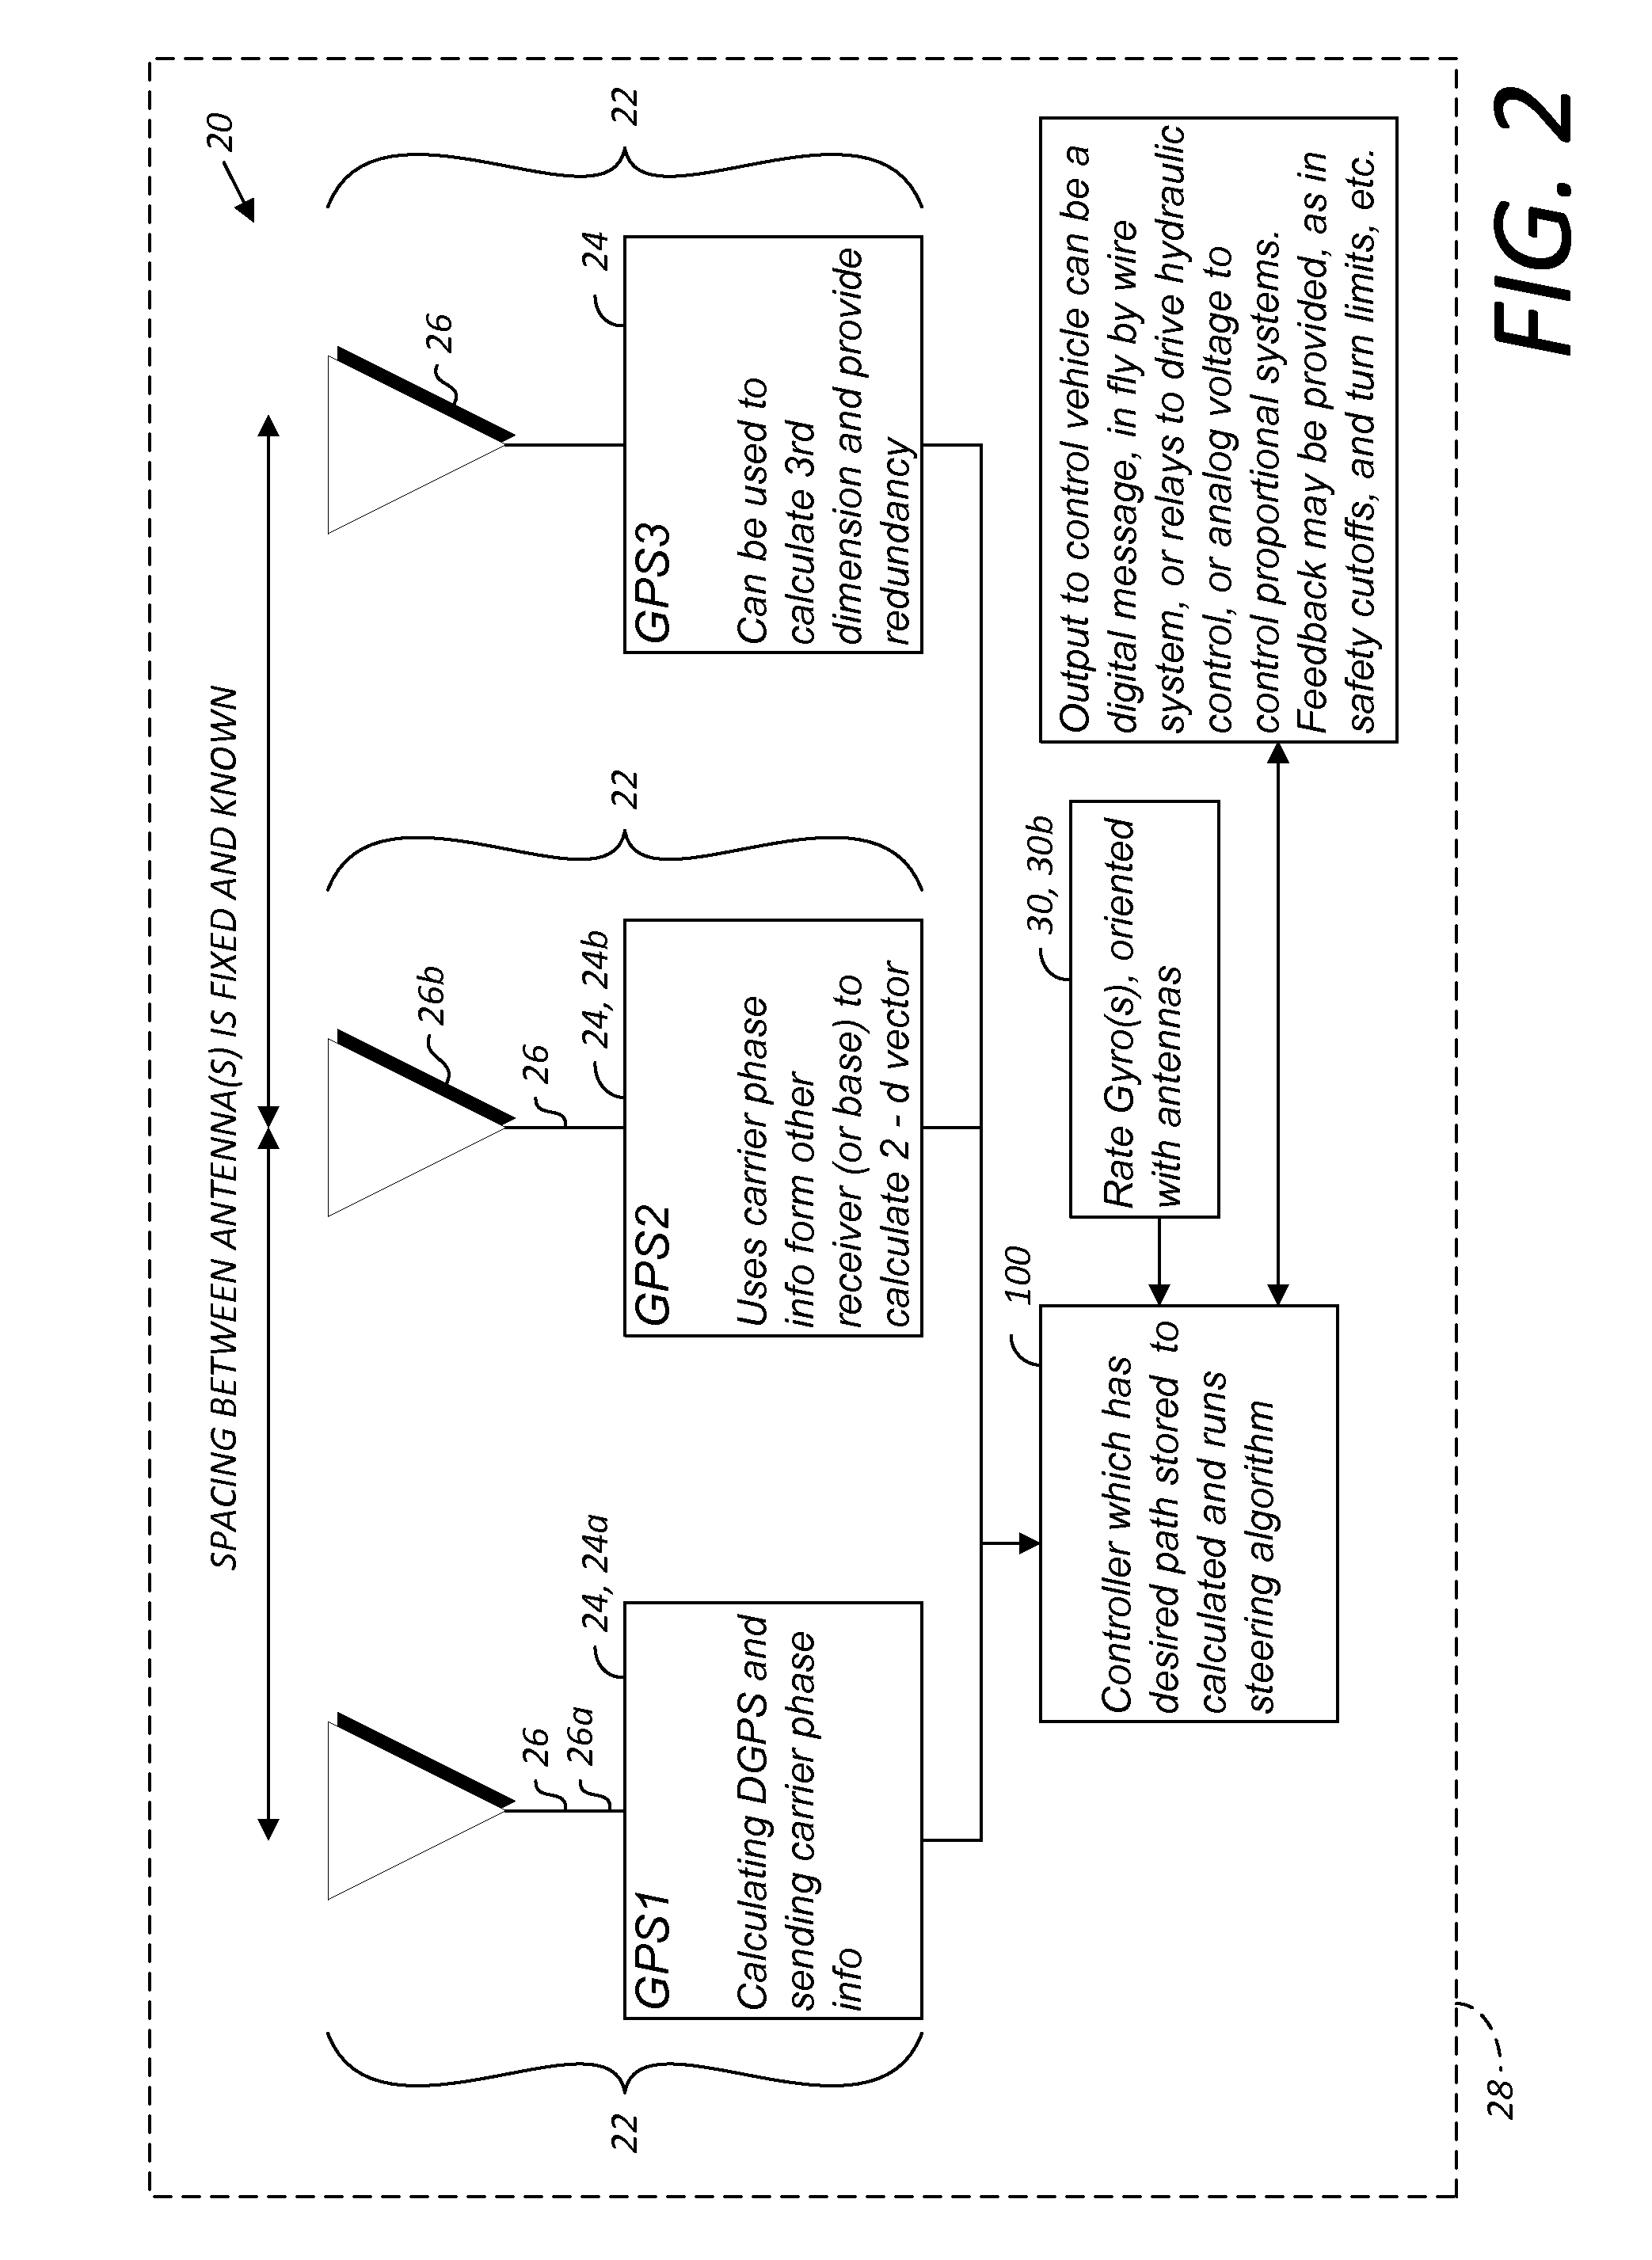 Multi-antenna GNSS control system and method